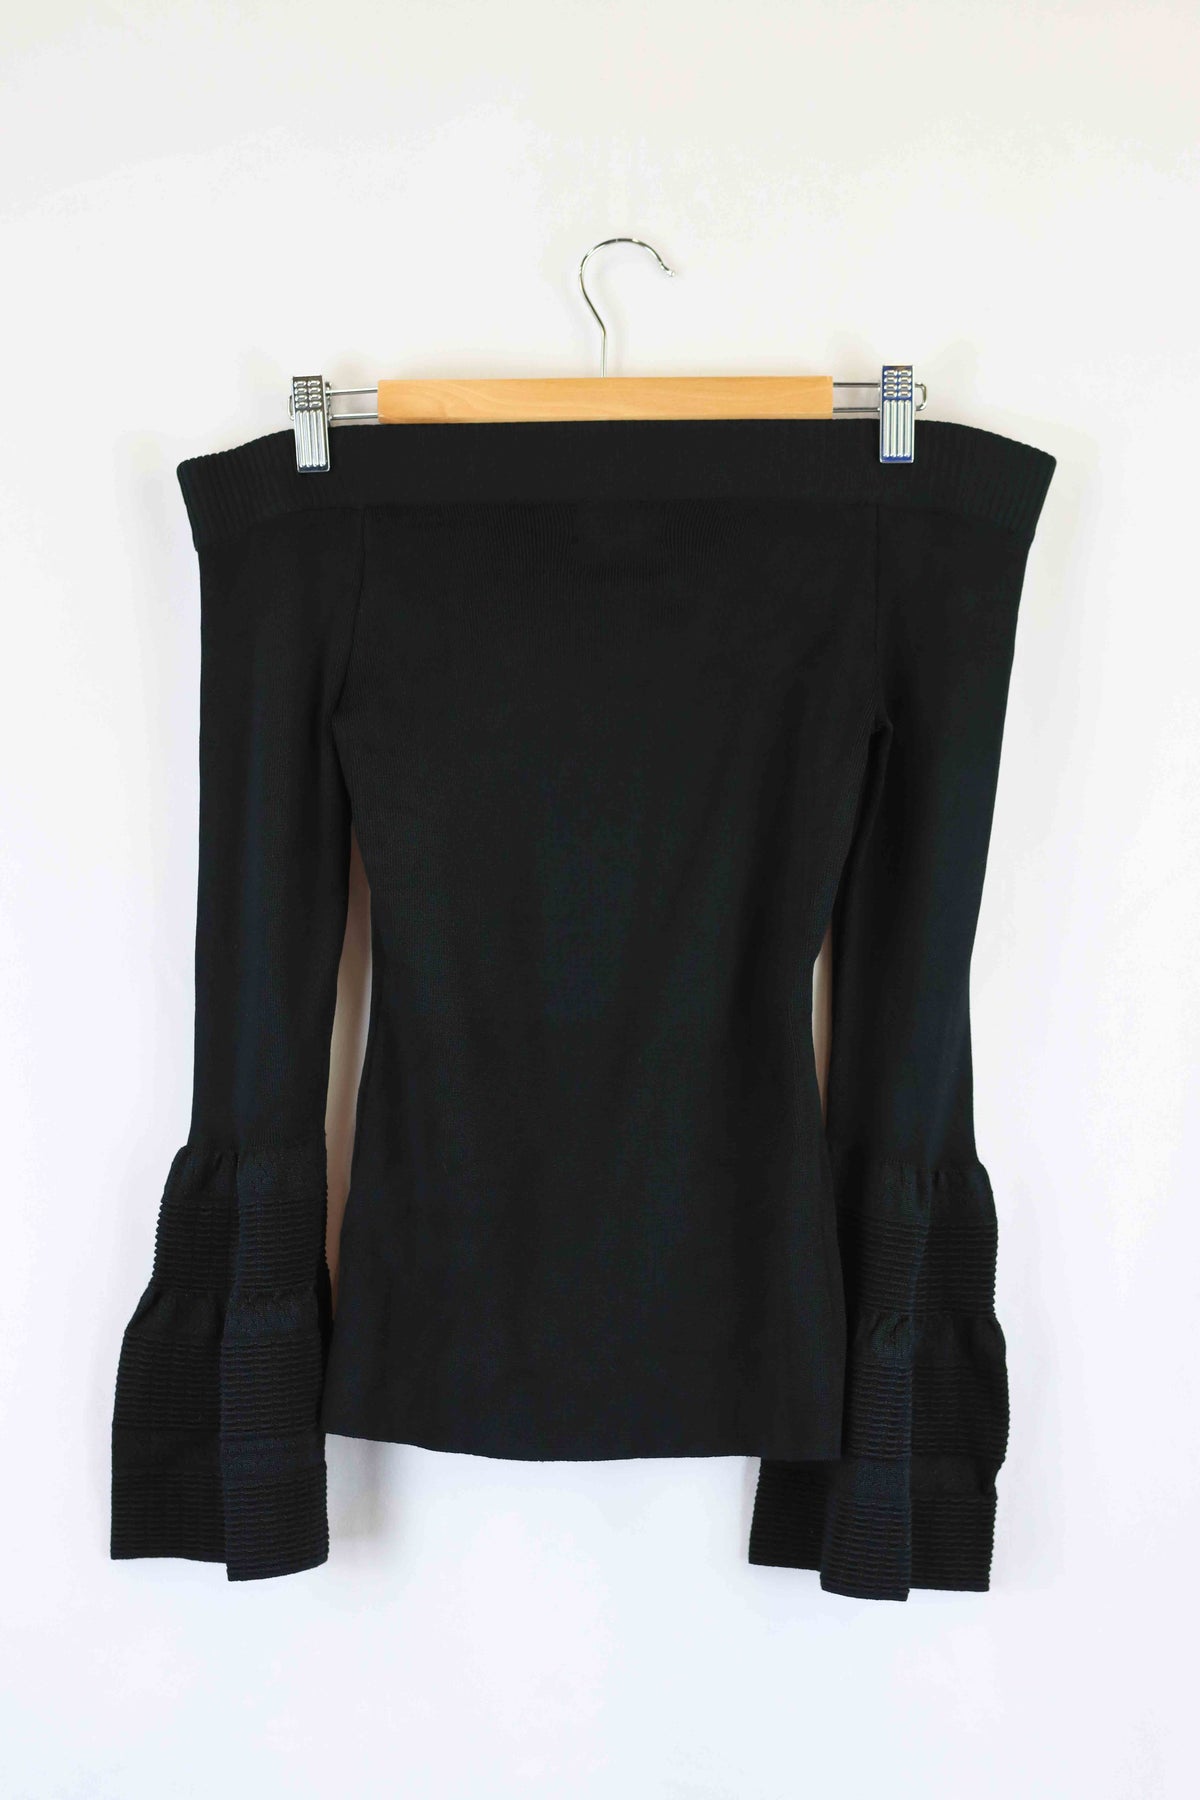 Seed Black Off The Shoulder Top XS